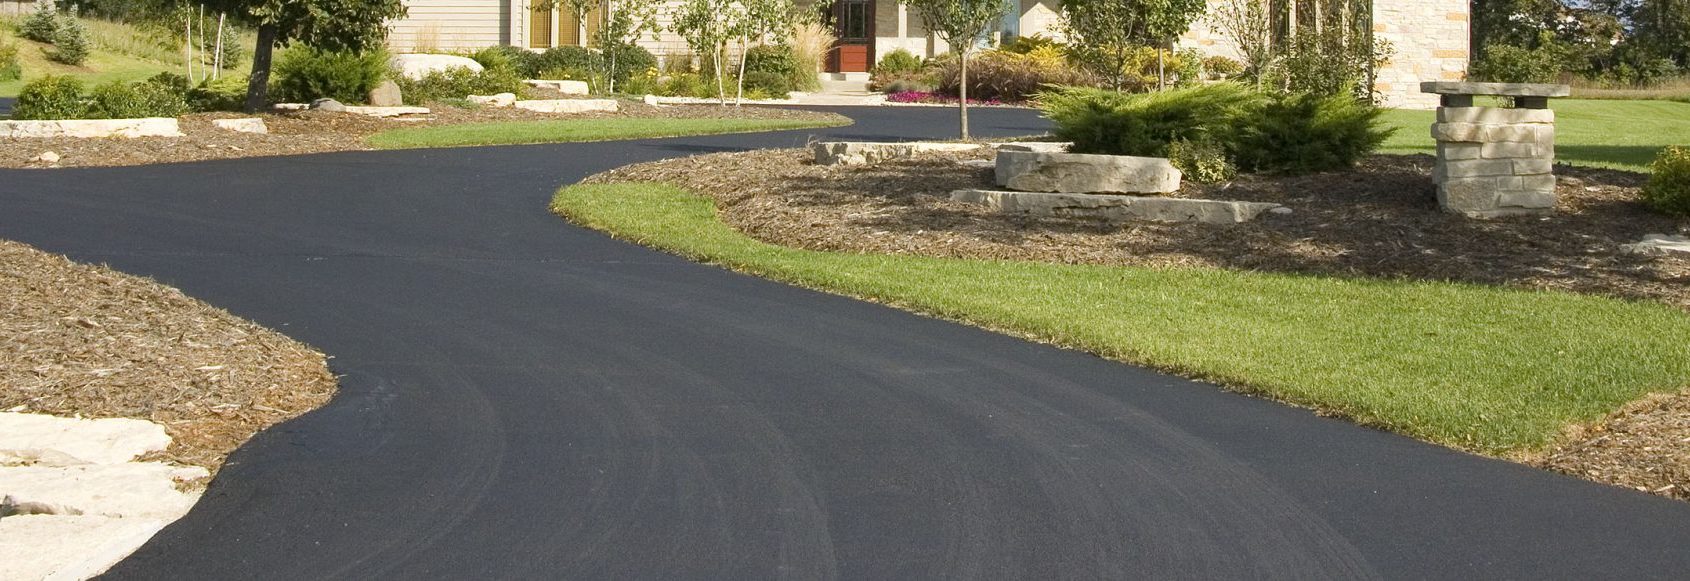 Driveway installation and resurfacing, Parking Lots, Laneways and Apronways, Sealcoating and Crack Repairs - Tar and Chip, Free Estimates, Complete Asphalt Services